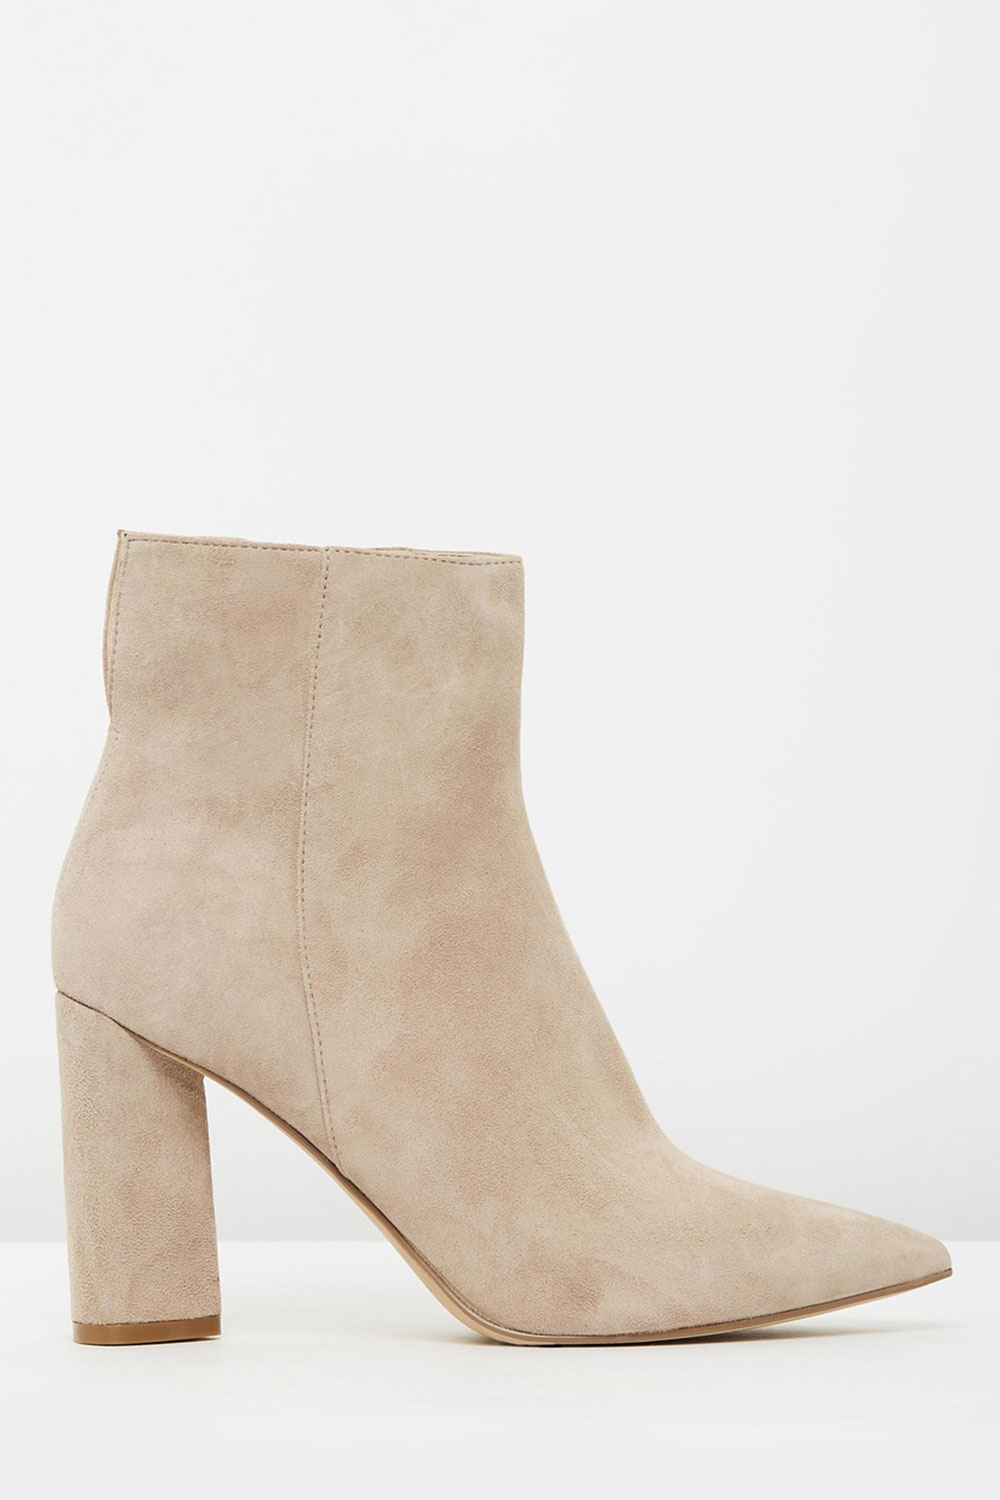 Kendall + Kylie ankle boots